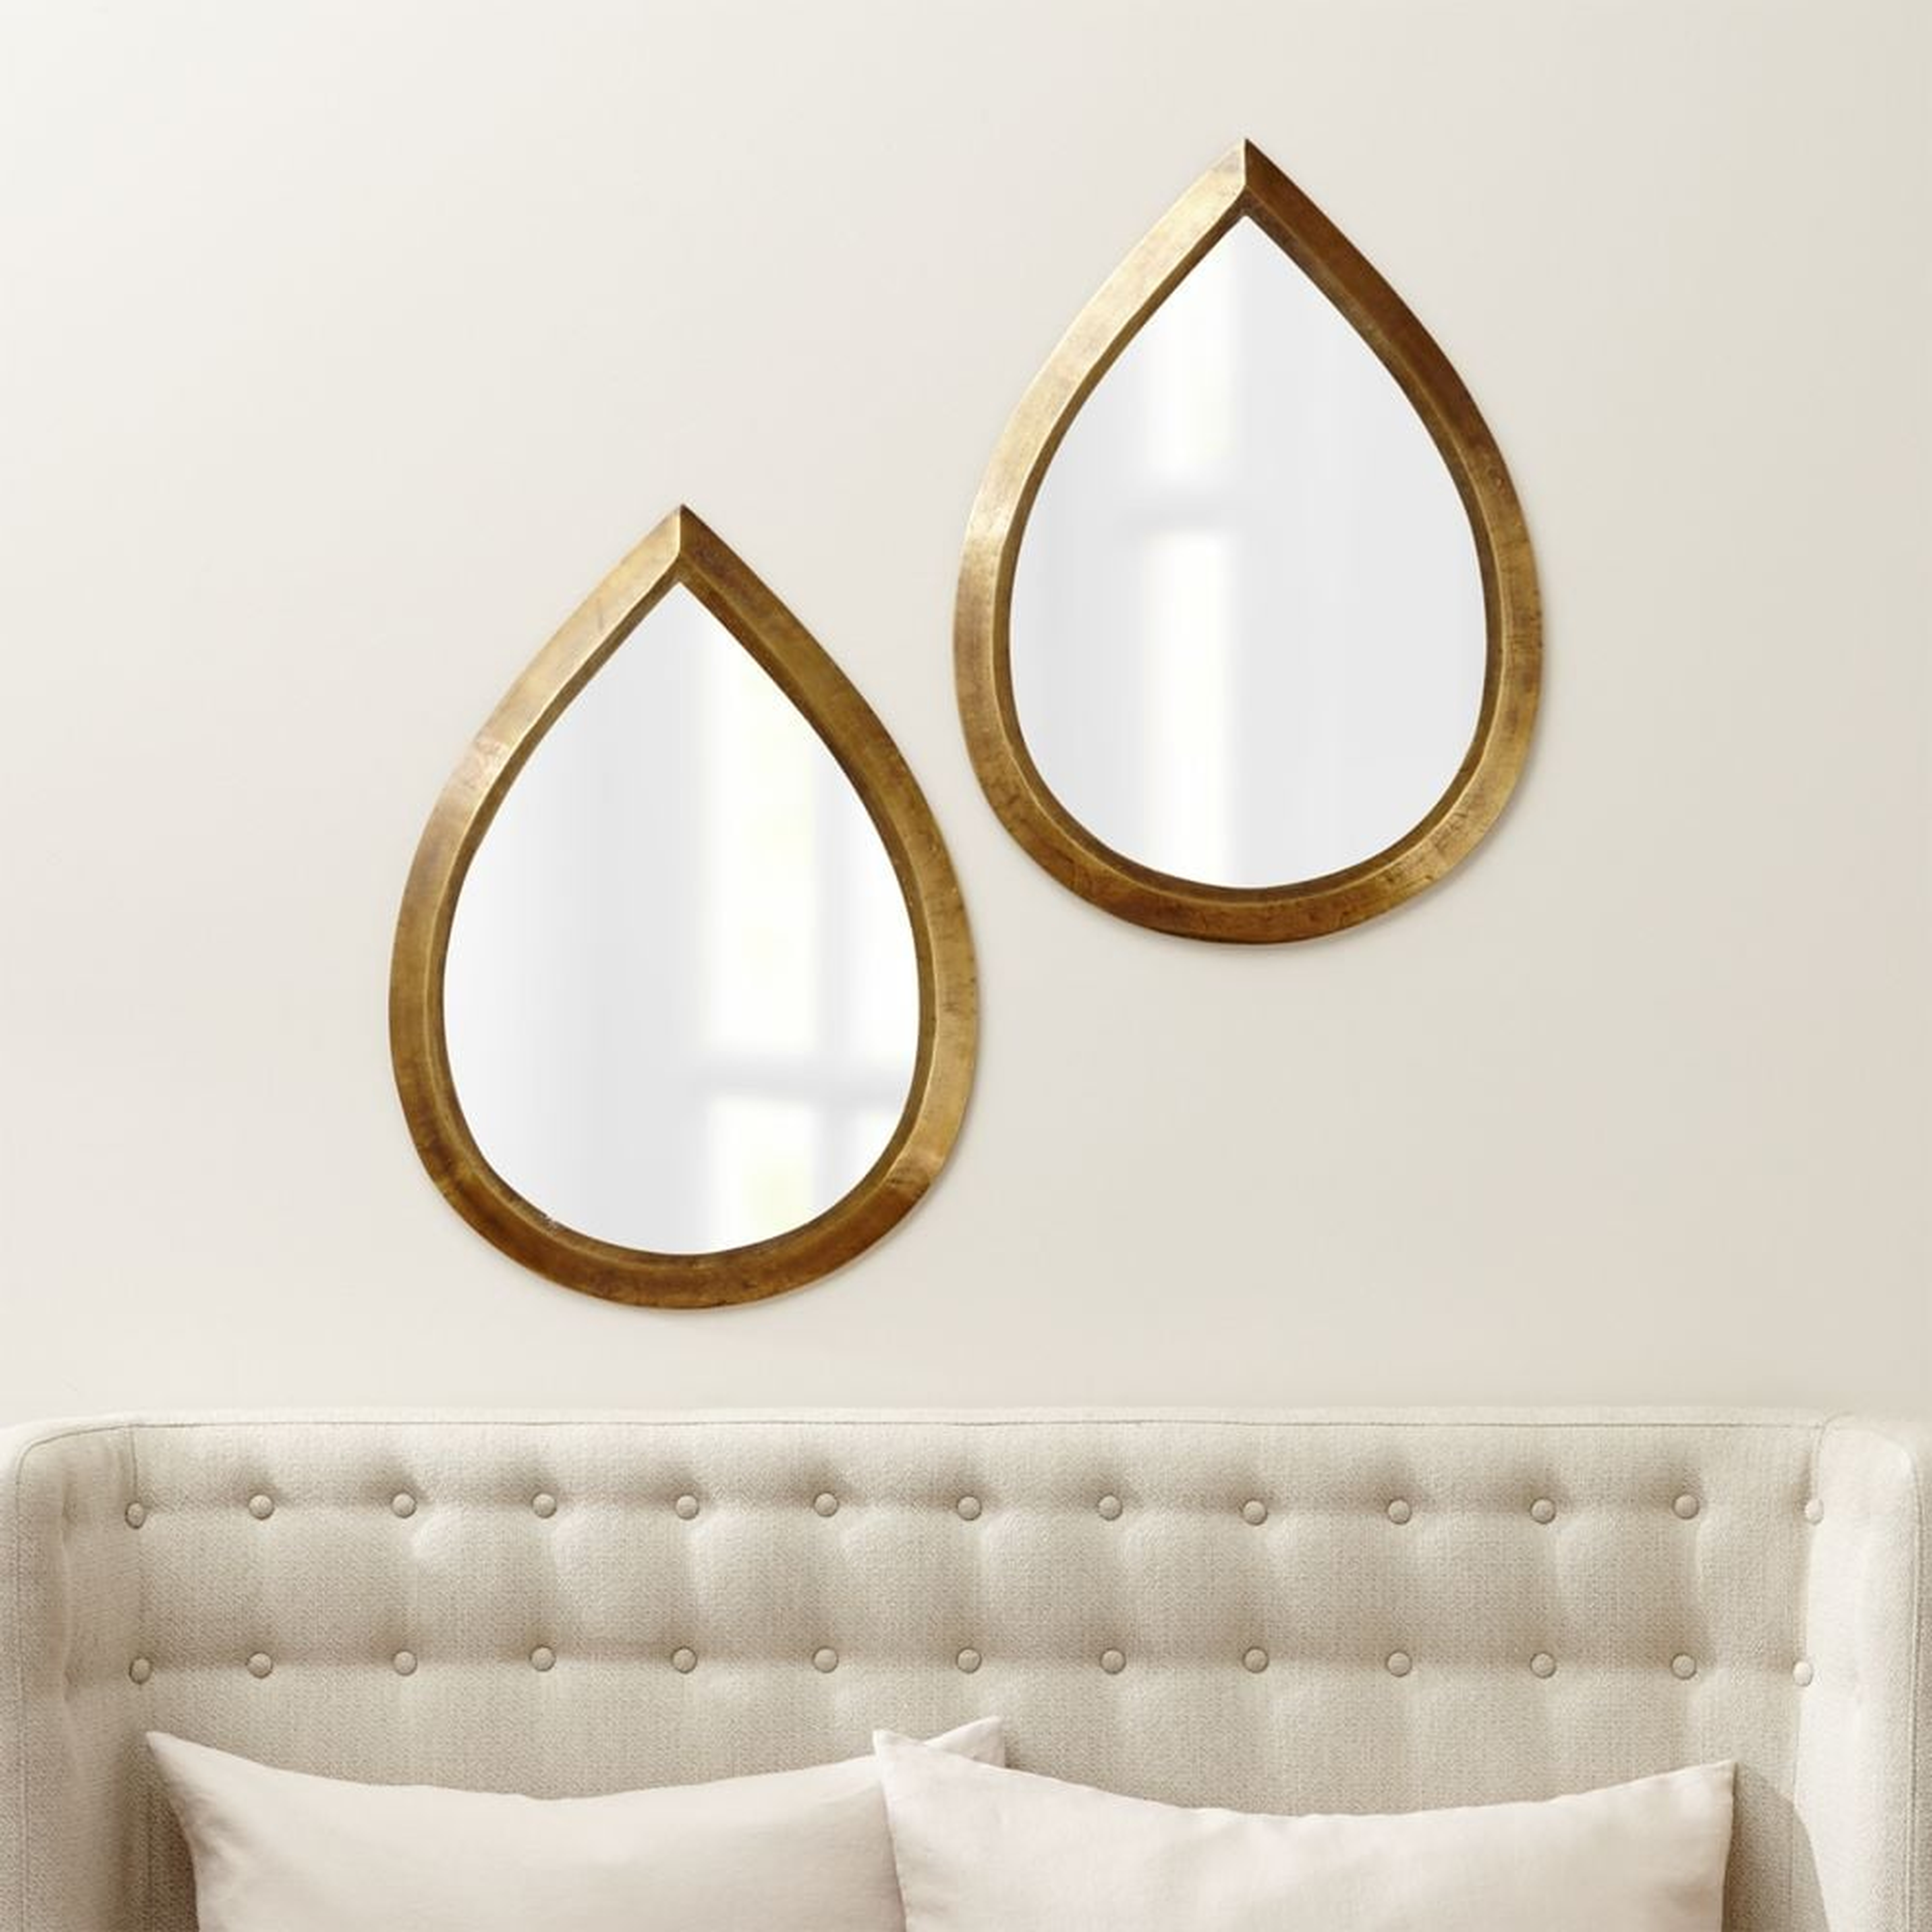 Kasbah Teardrop Brass Wall Mirrors, Set of 2 - Crate and Barrel